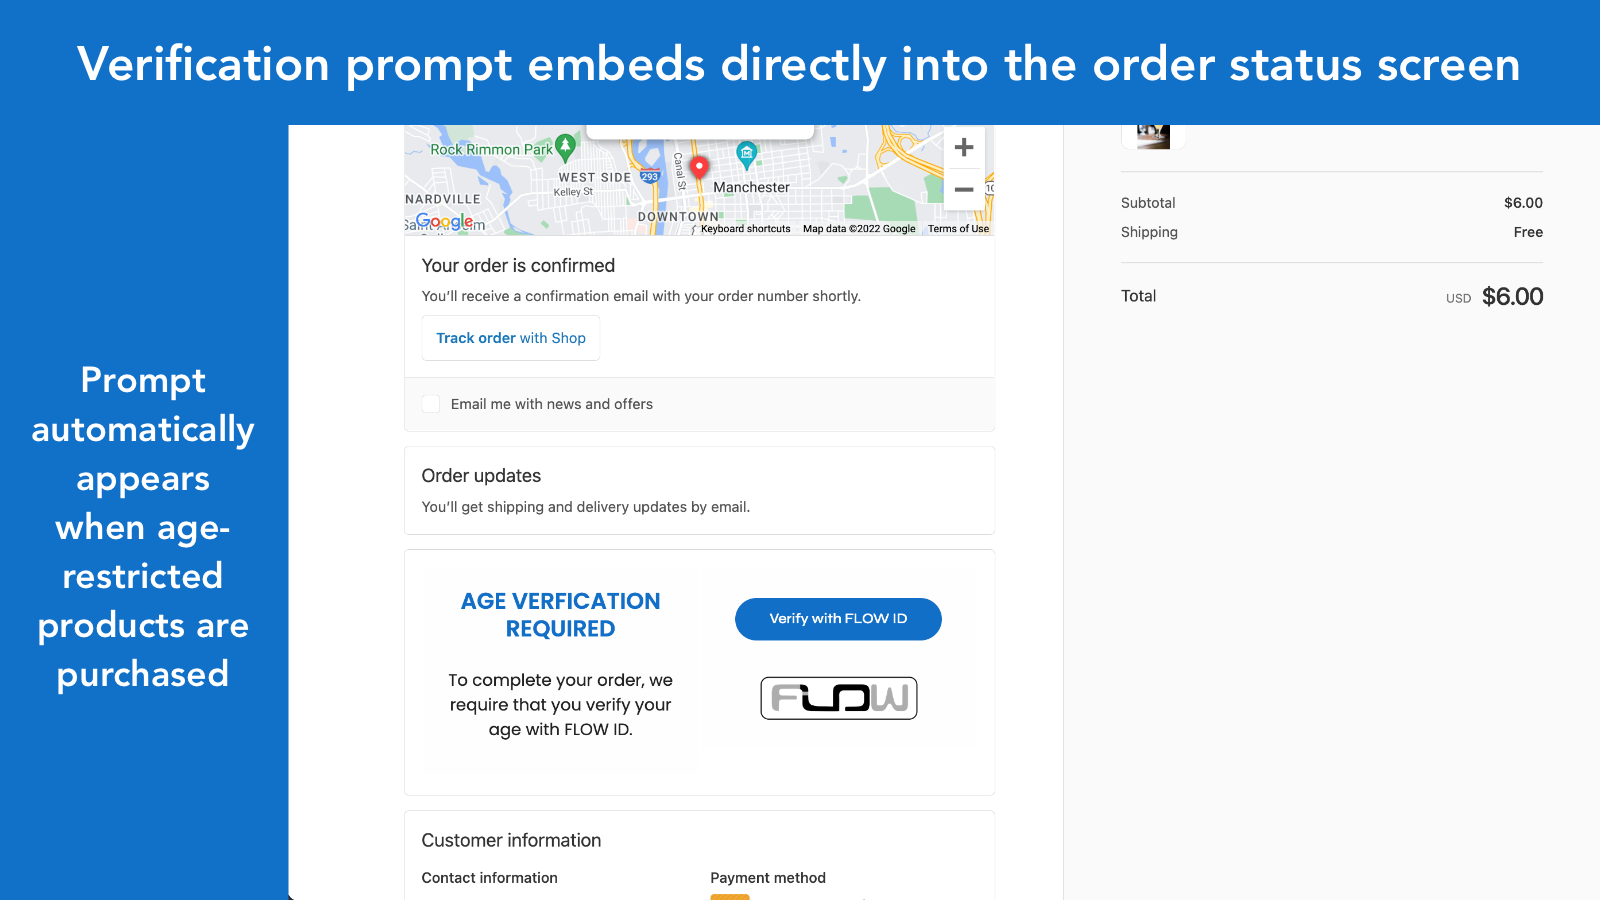 Verification prompt embeds directly into the order status screen